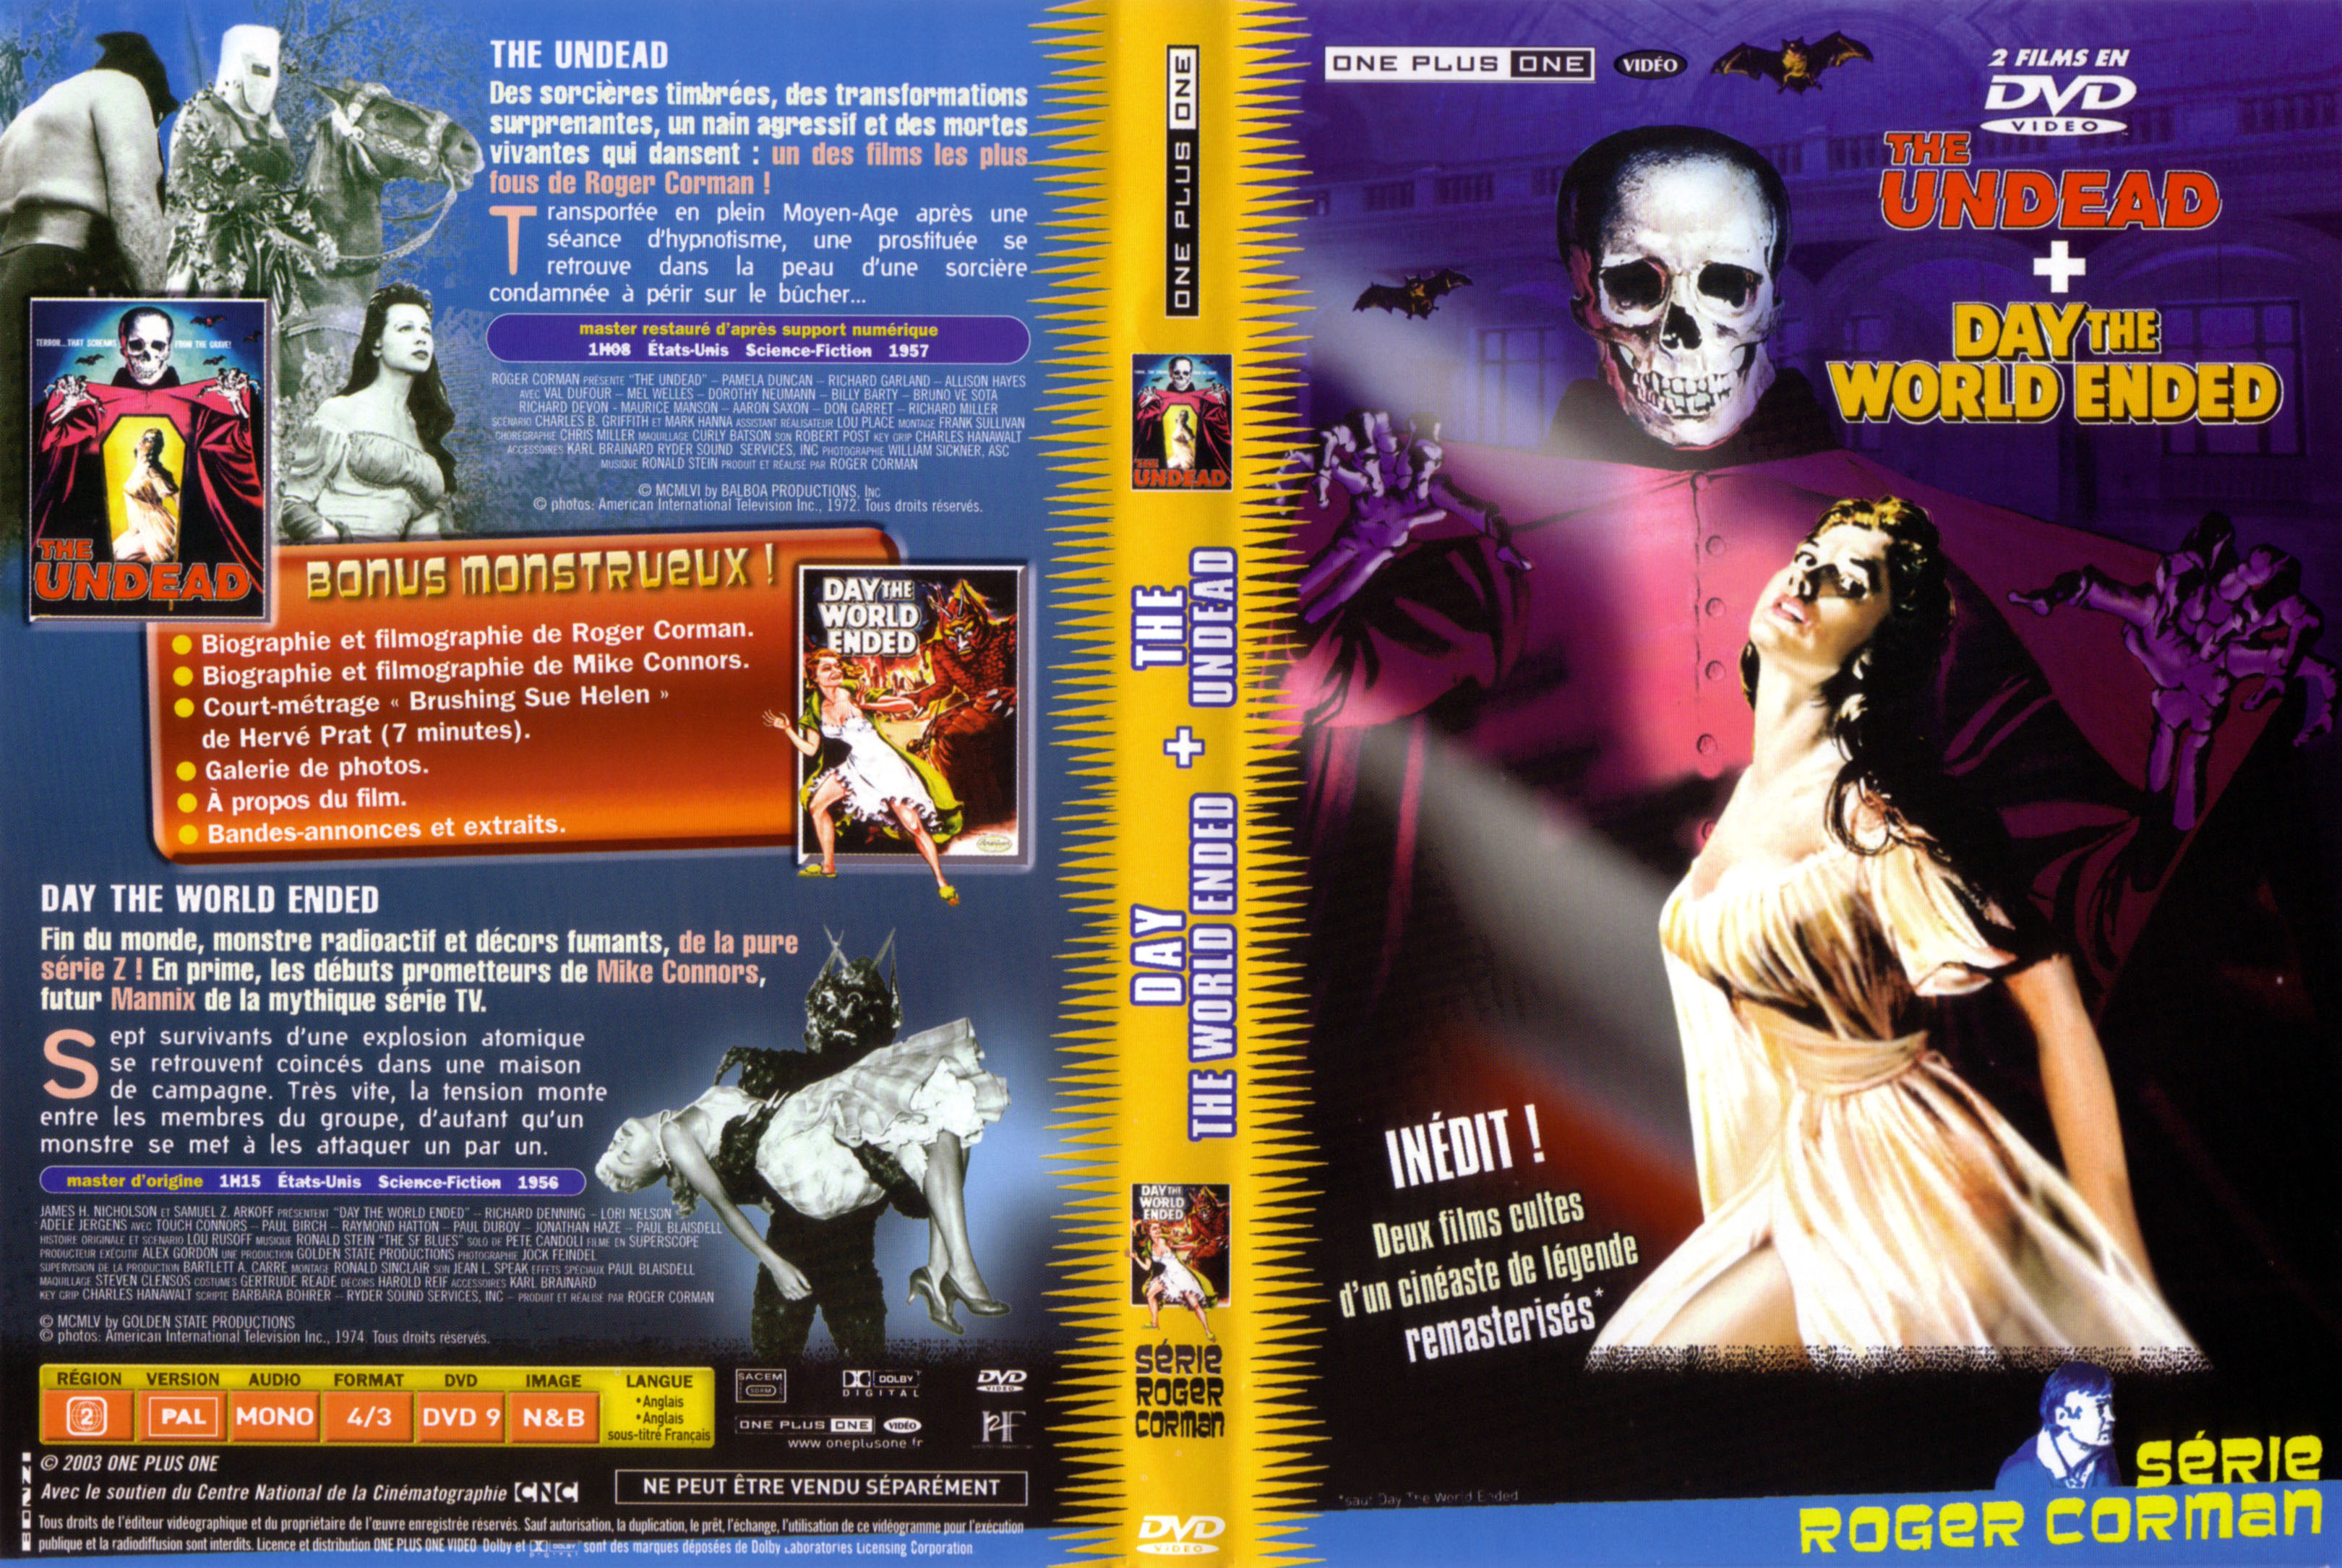 Jaquette DVD The undead + Day the world ended